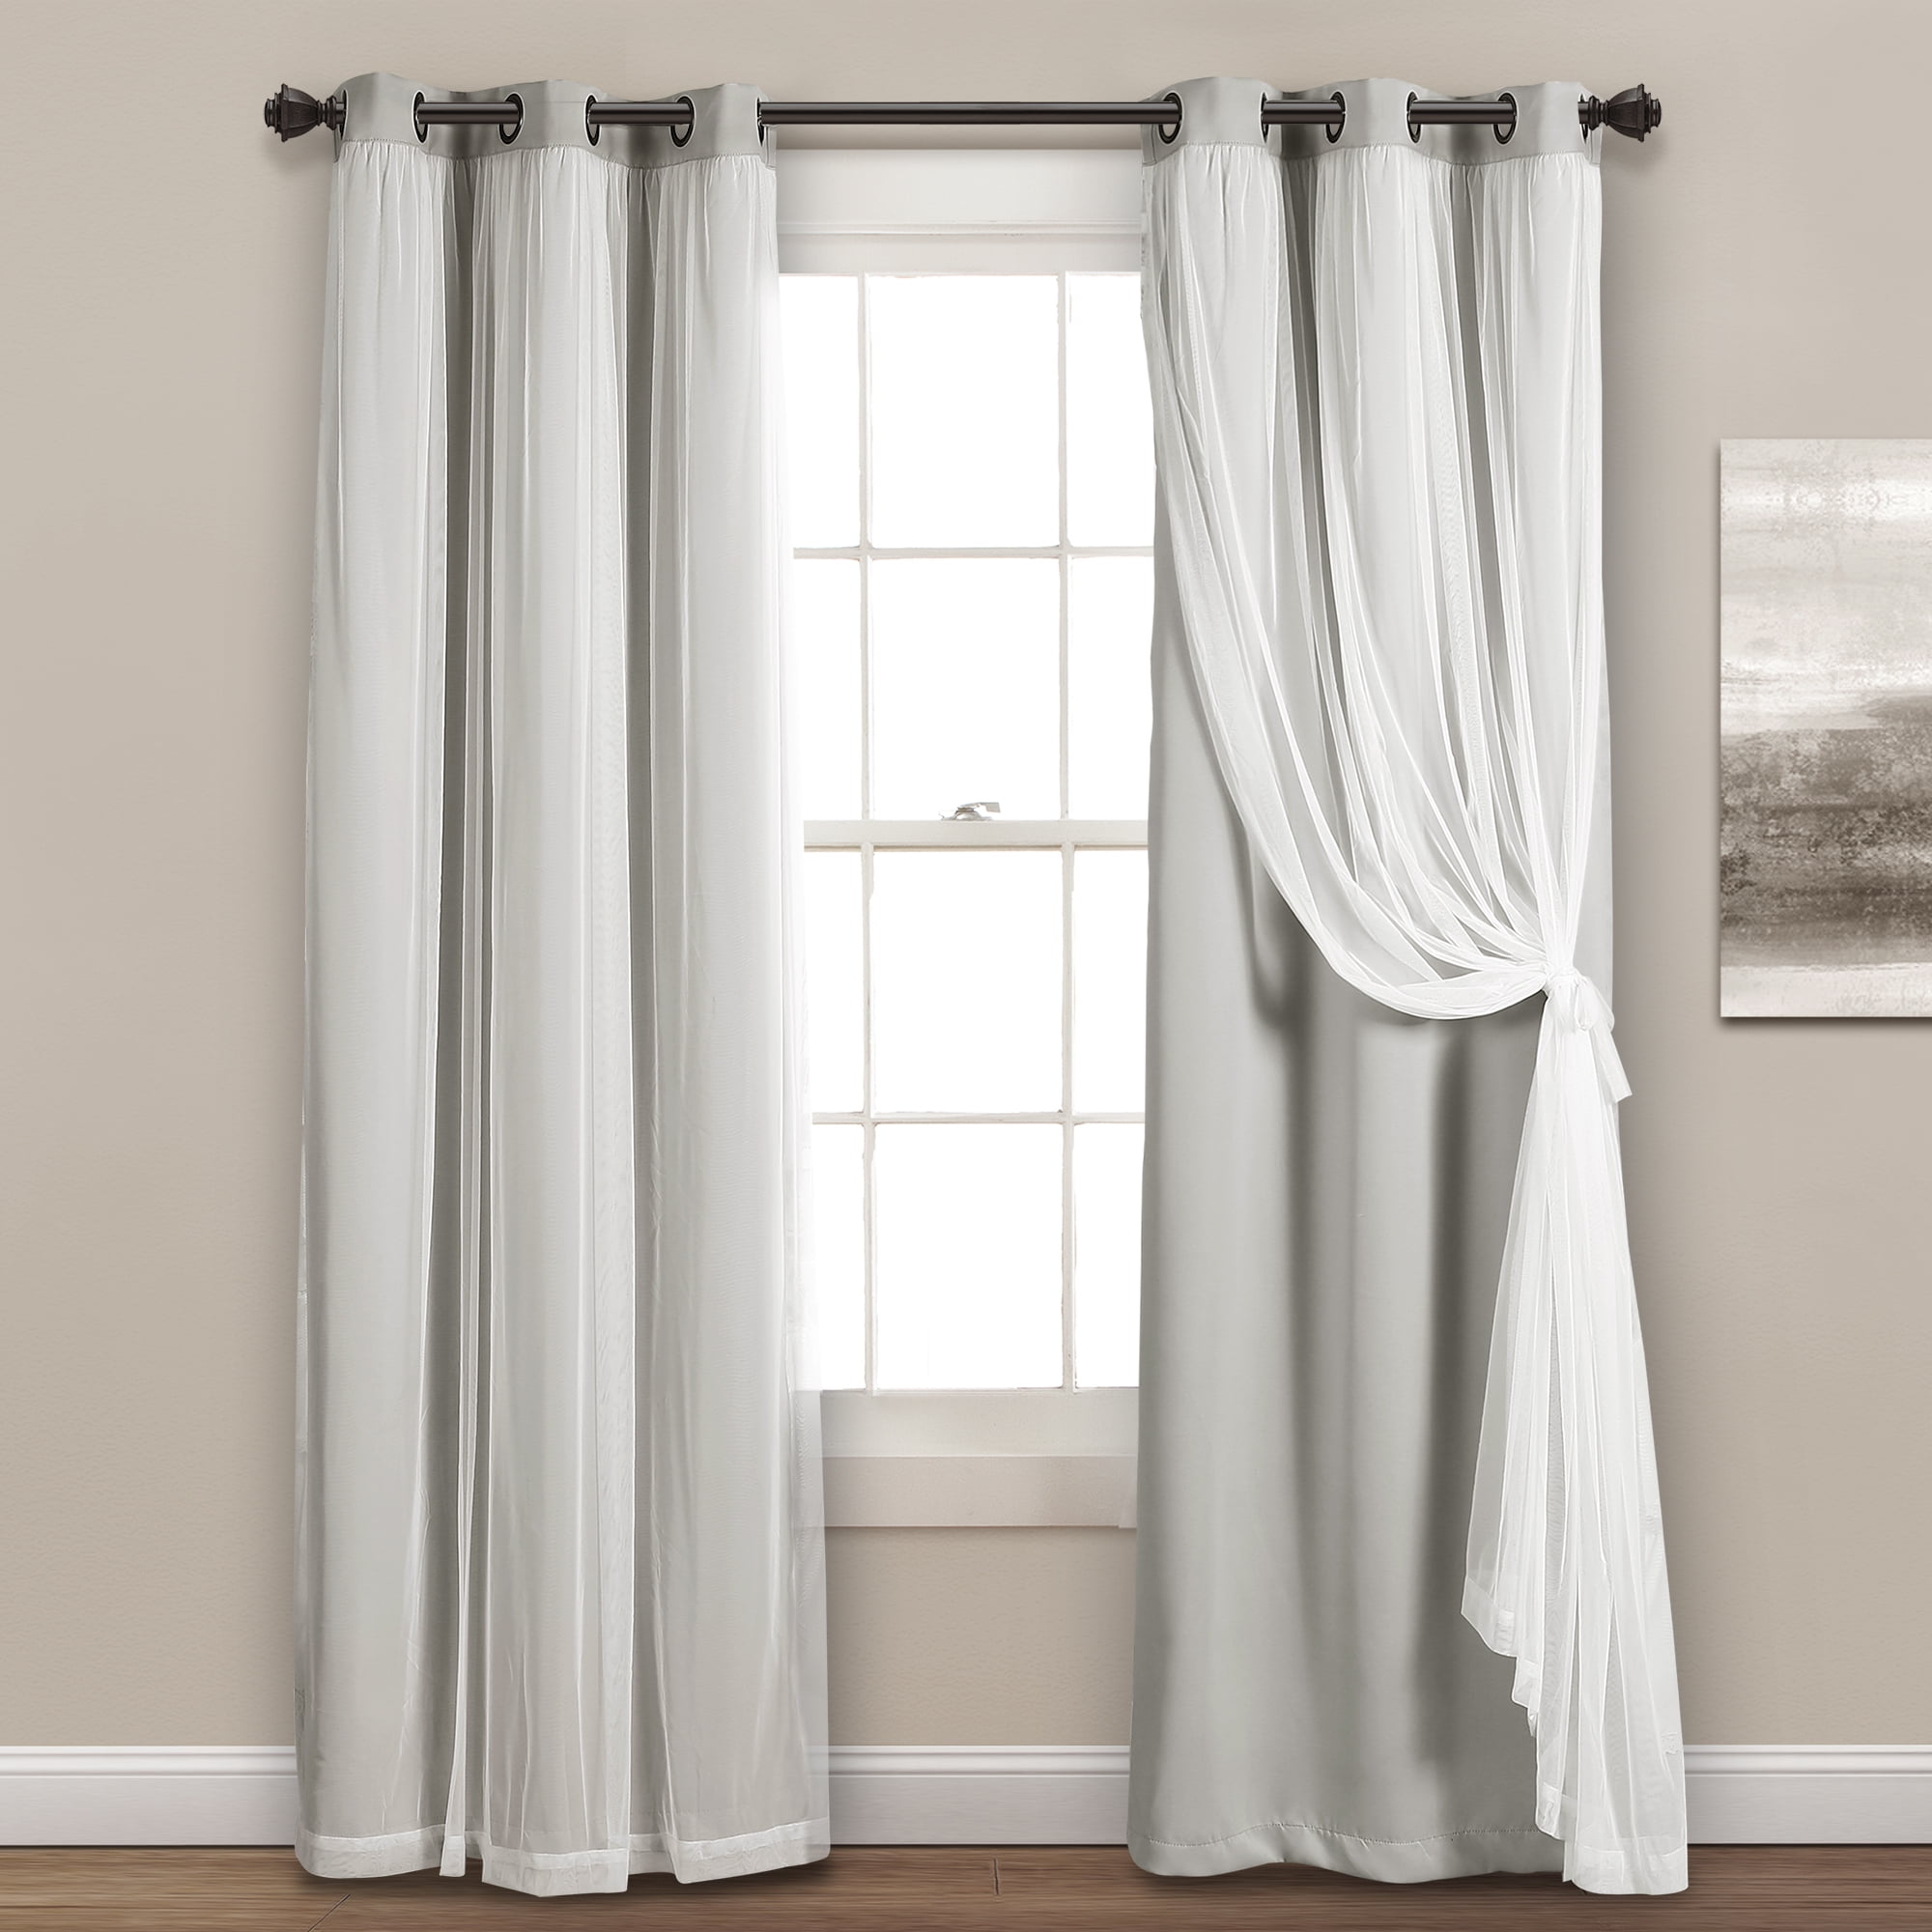 Lush Decor Grommet Sheer Panels with Insulated Blackout Lining Light